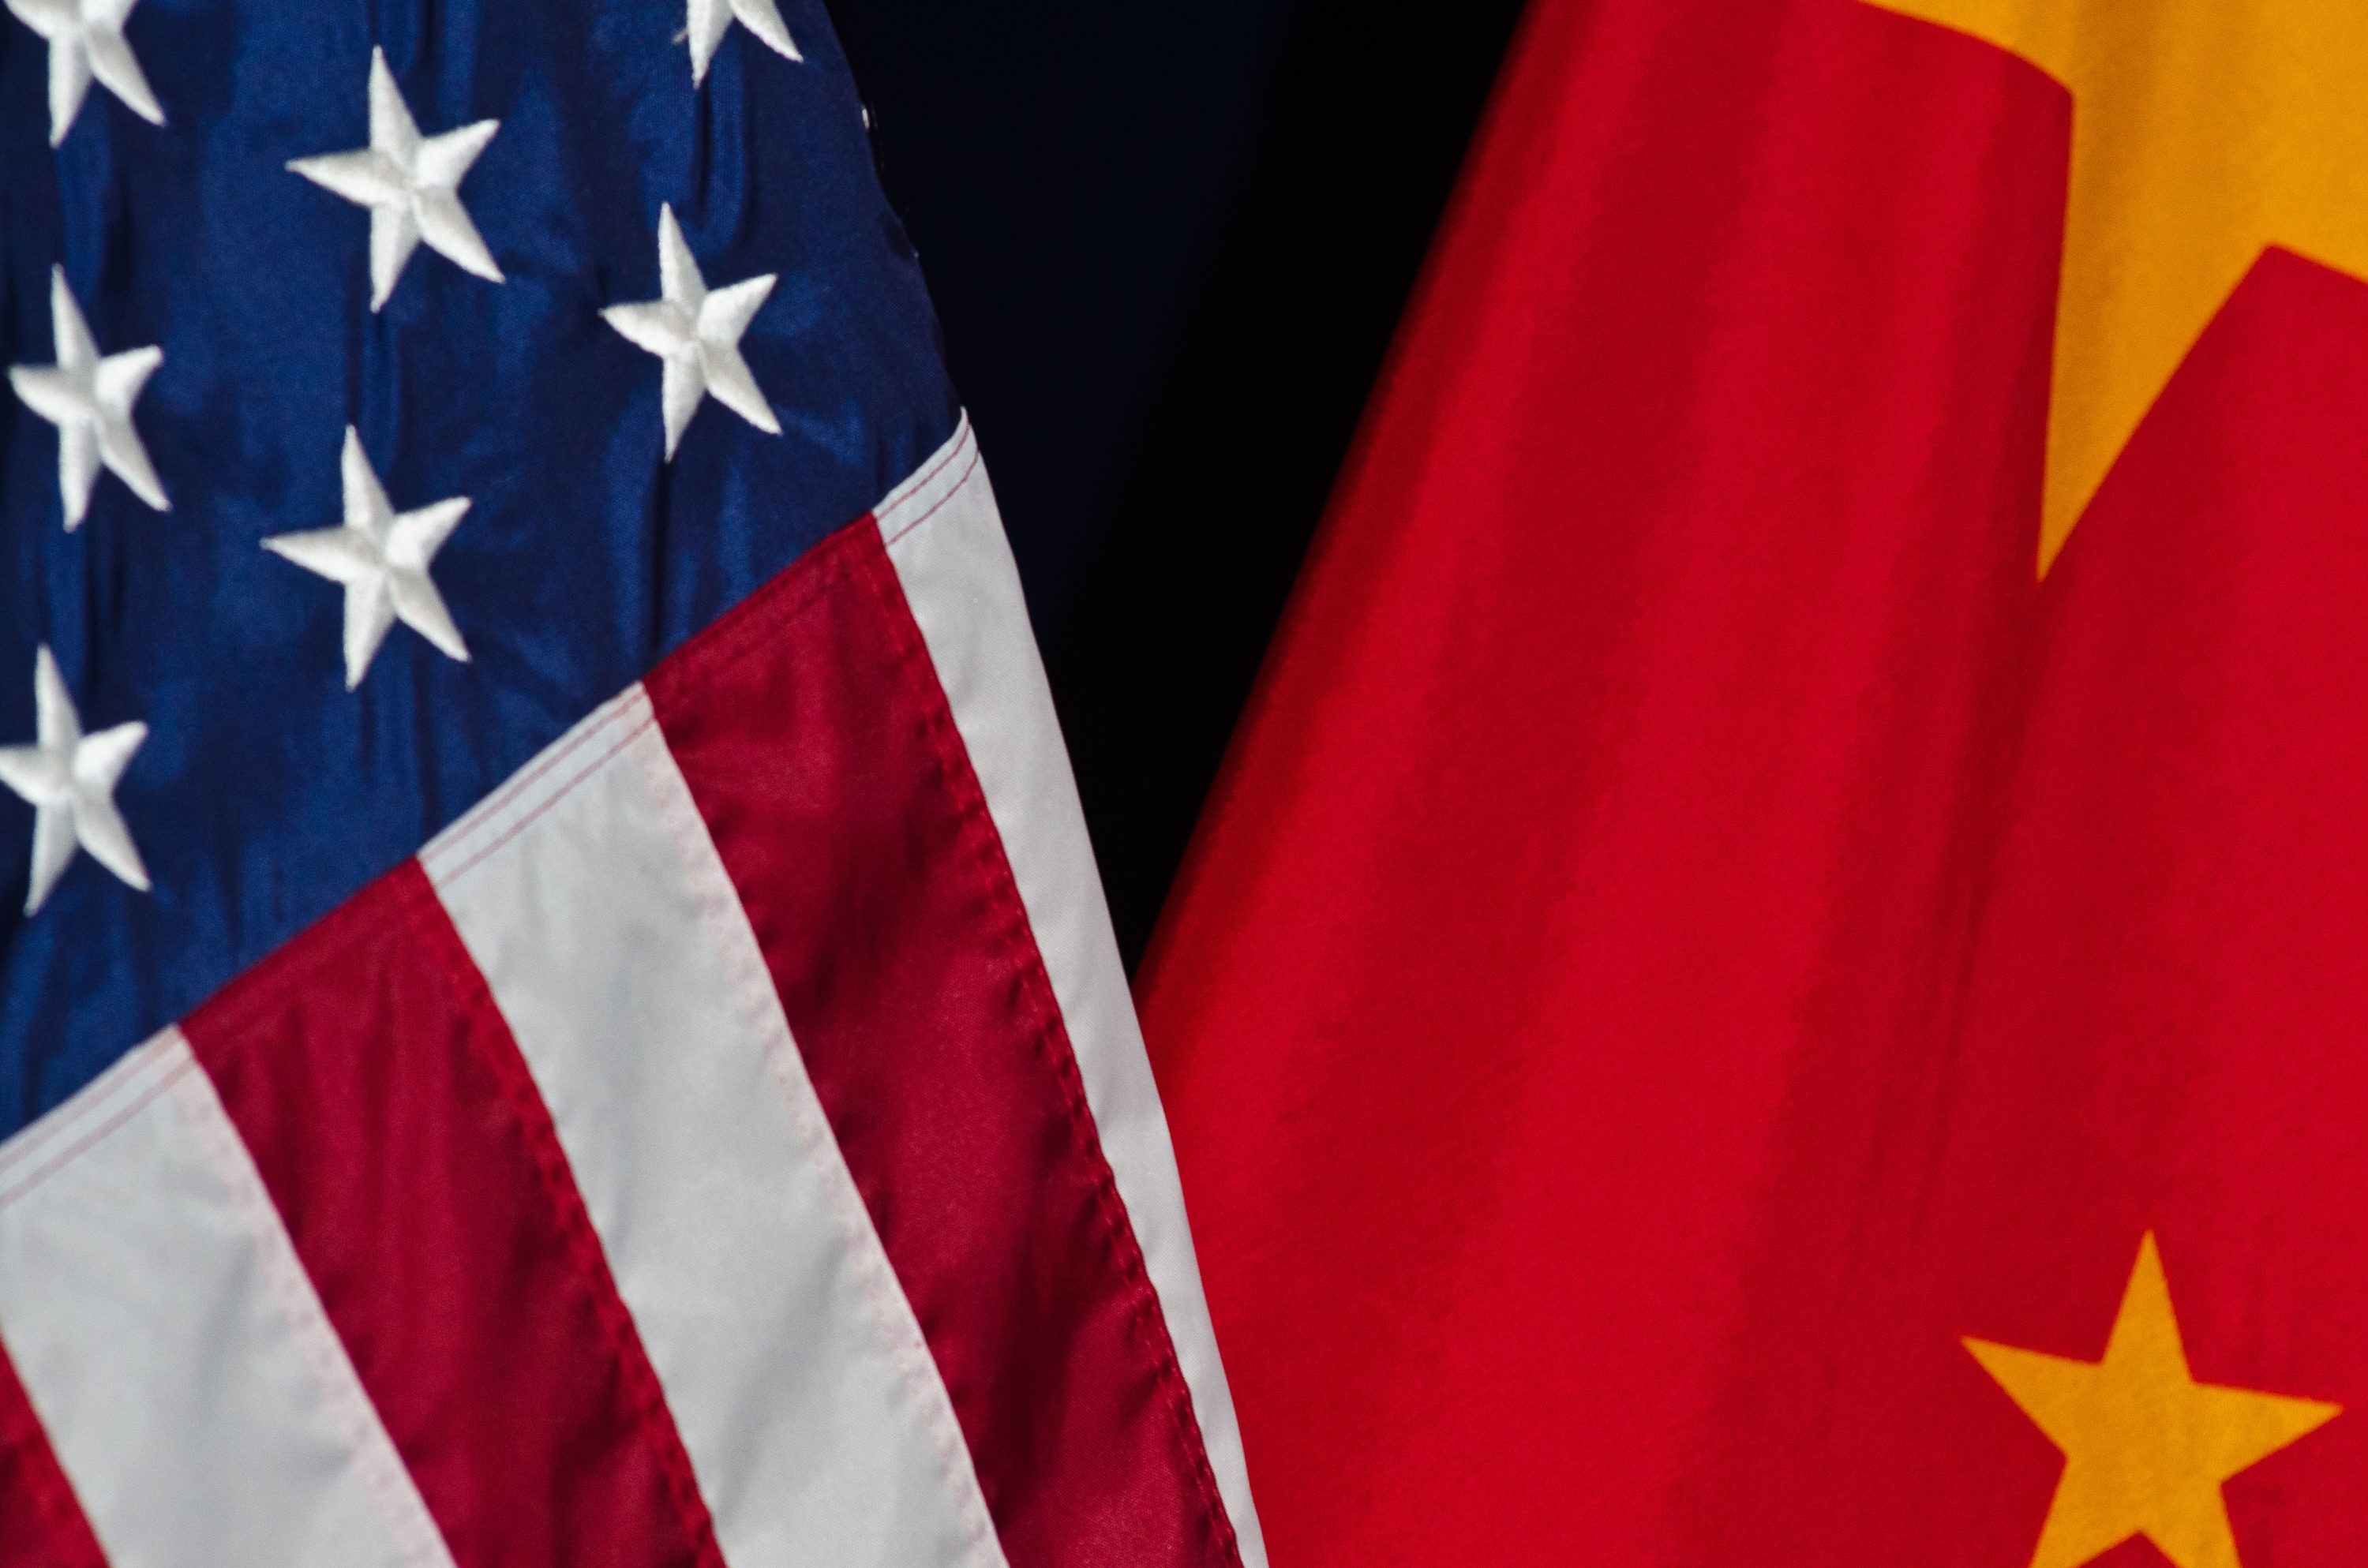 Flags of the United States and China